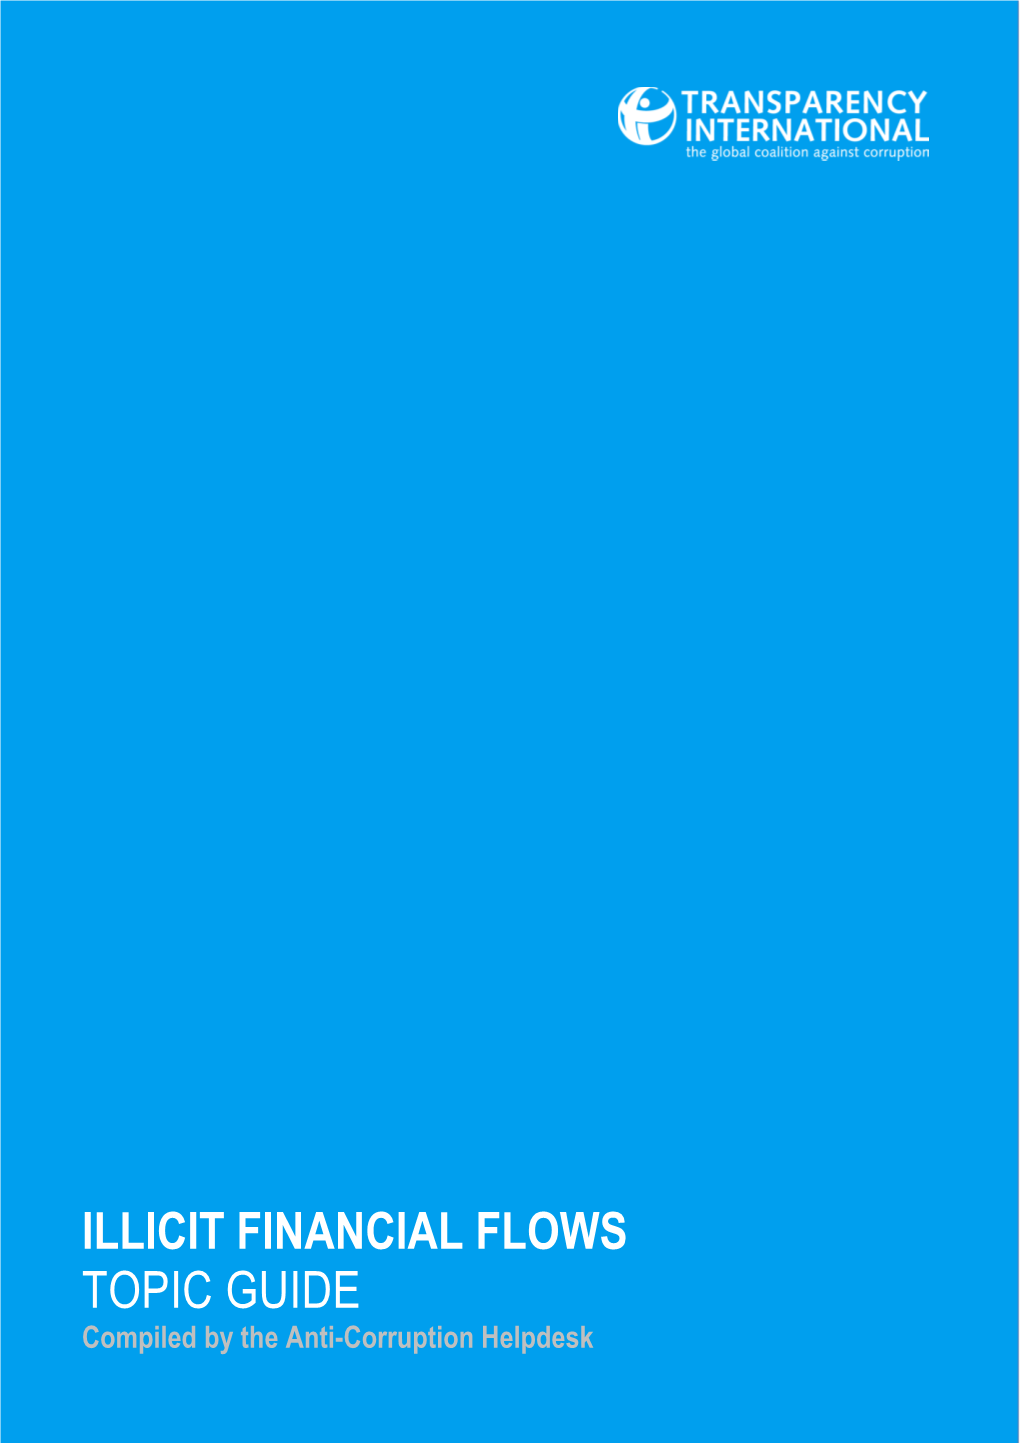 Topic Guide on Illicit Financial Flows